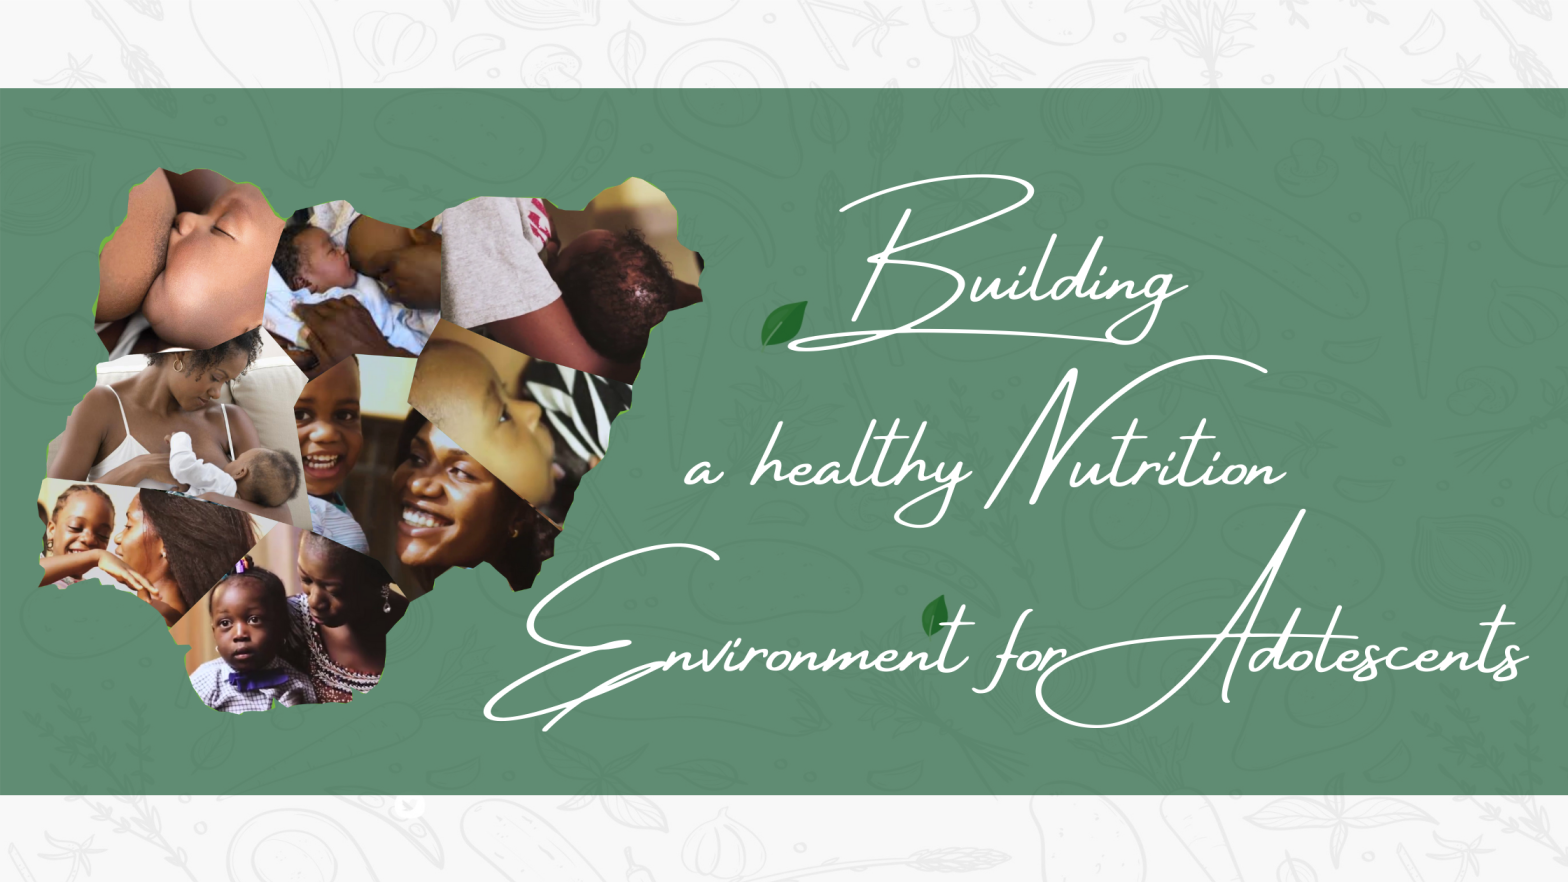 You are currently viewing Let’s Talk Nutrition: Building a Healthy Nutrition Environment for Adolescents